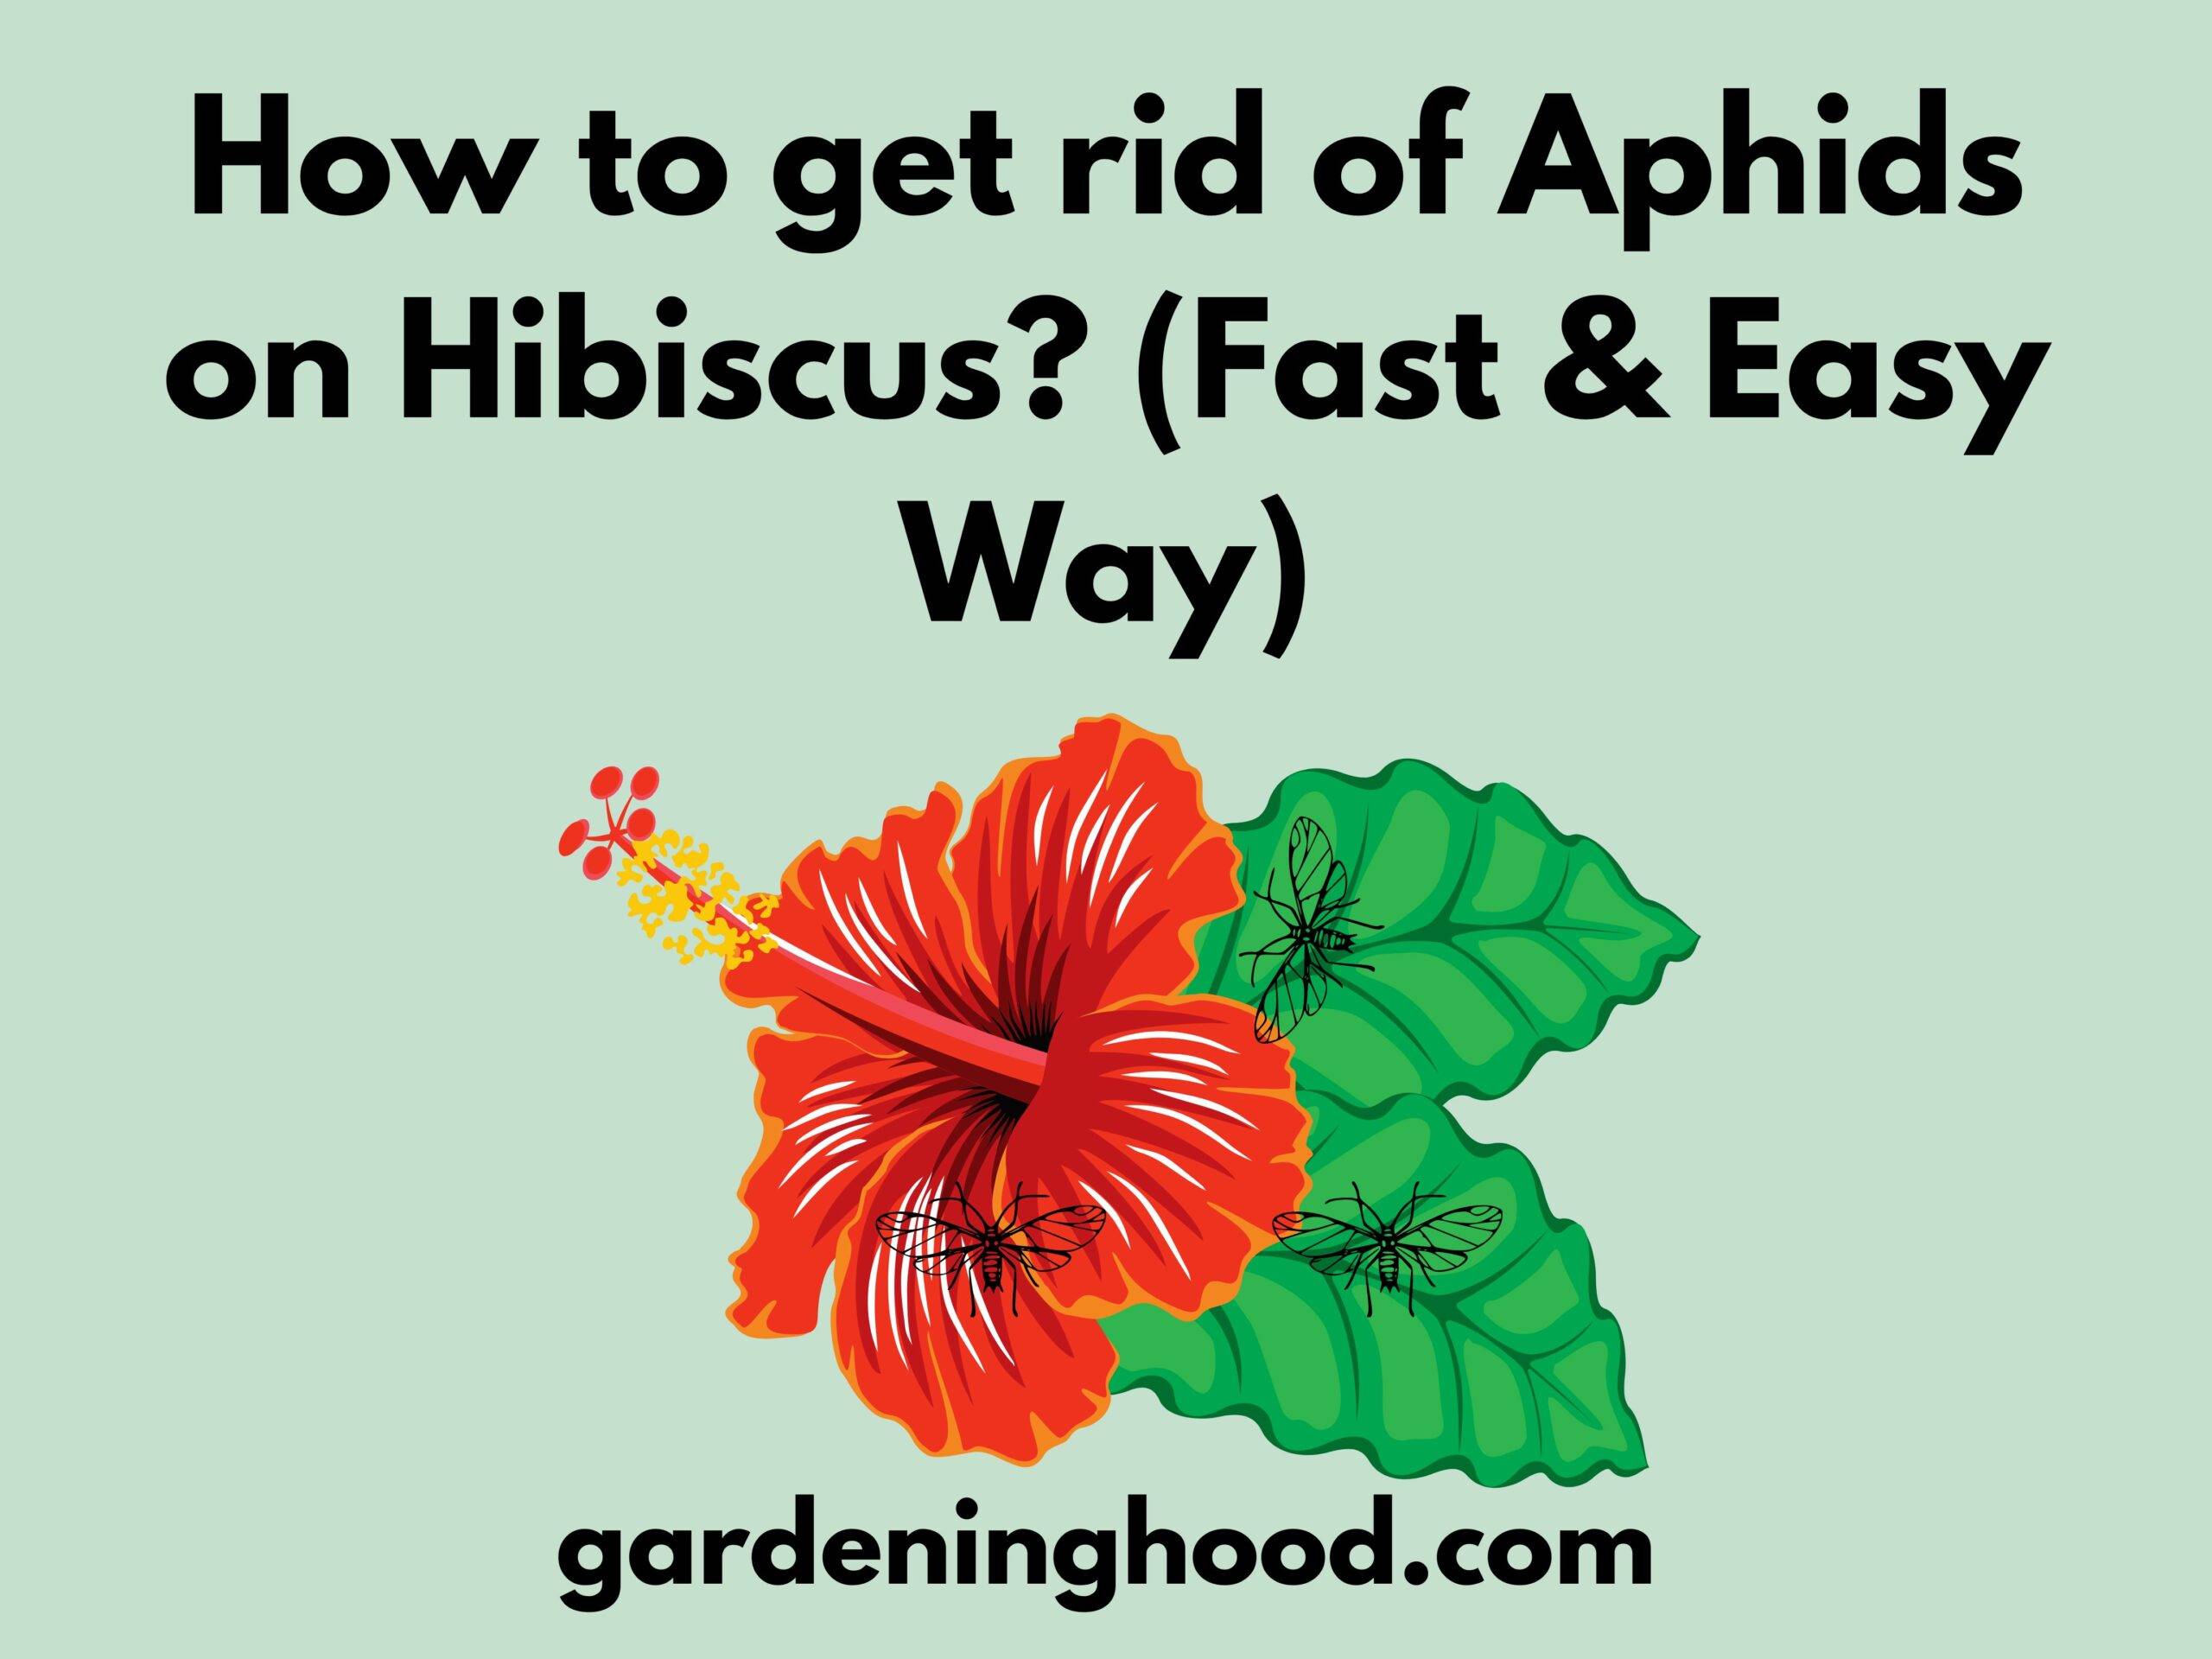 How to get rid of Aphids on Hibiscus? (Fast & Easy Way)